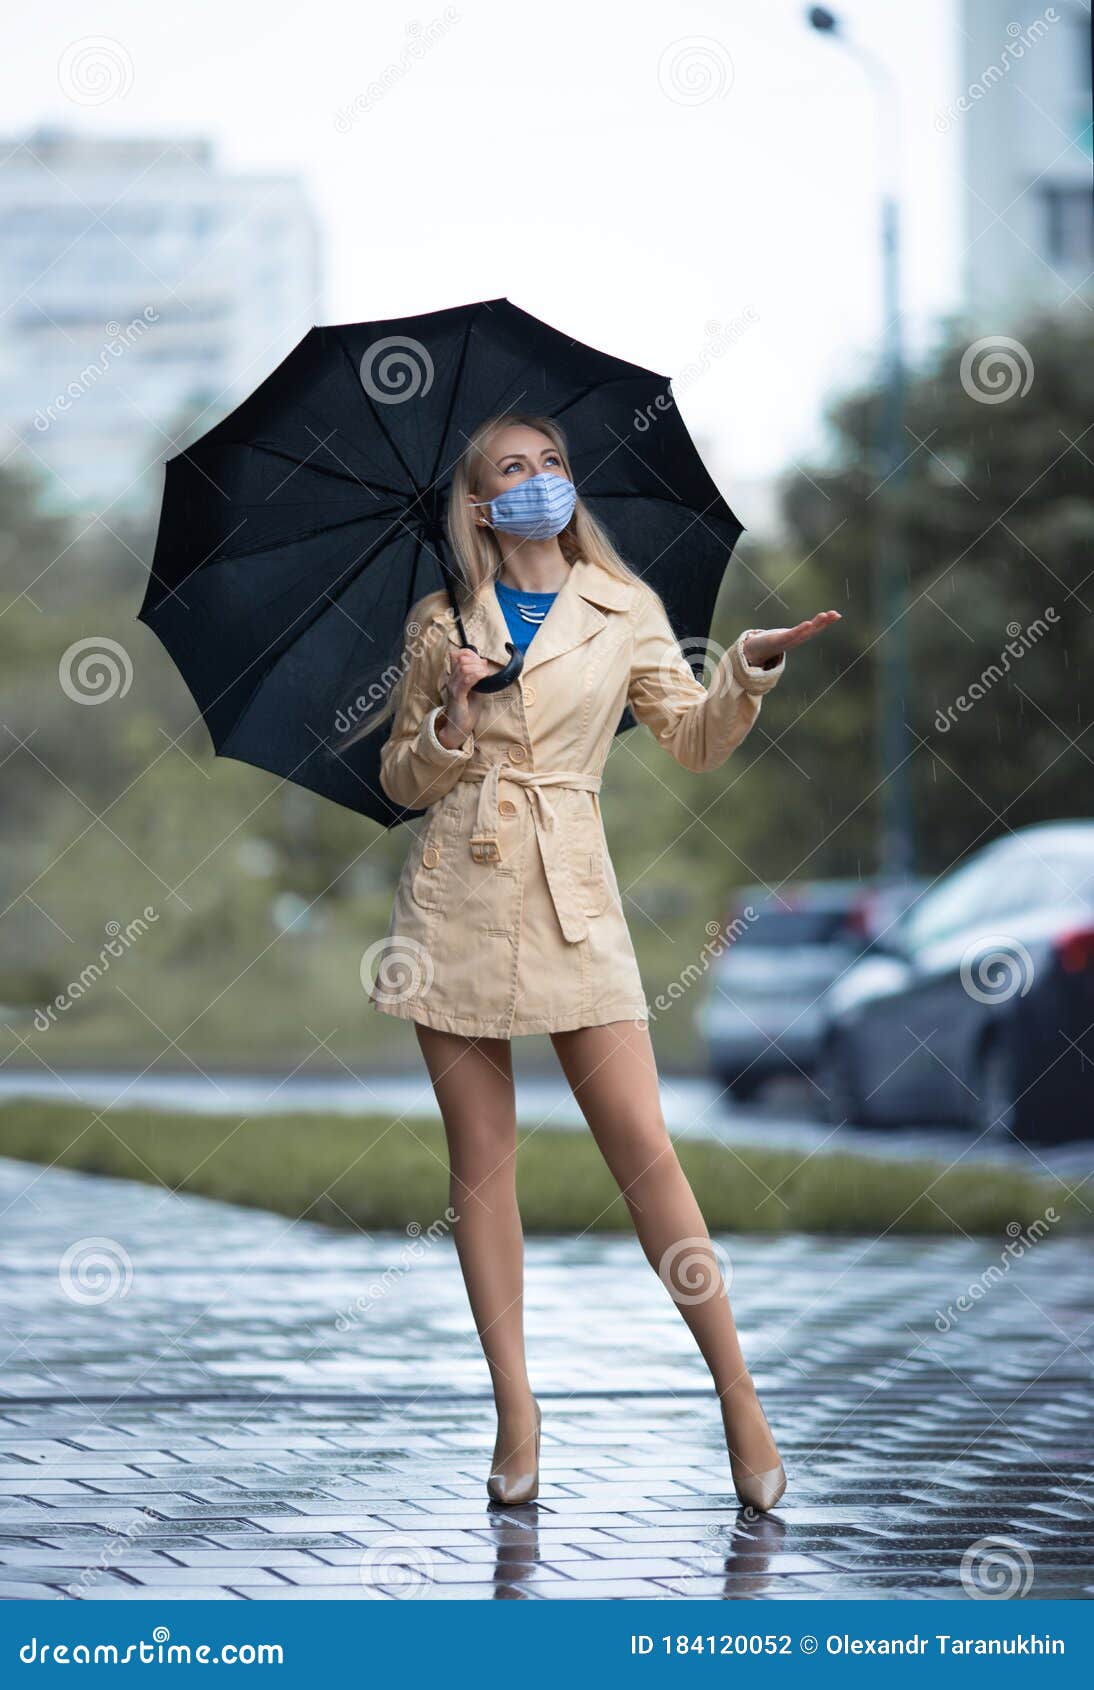 Girl with Perfect Legs in Pantyhose with Umbrella Under the Rain ...